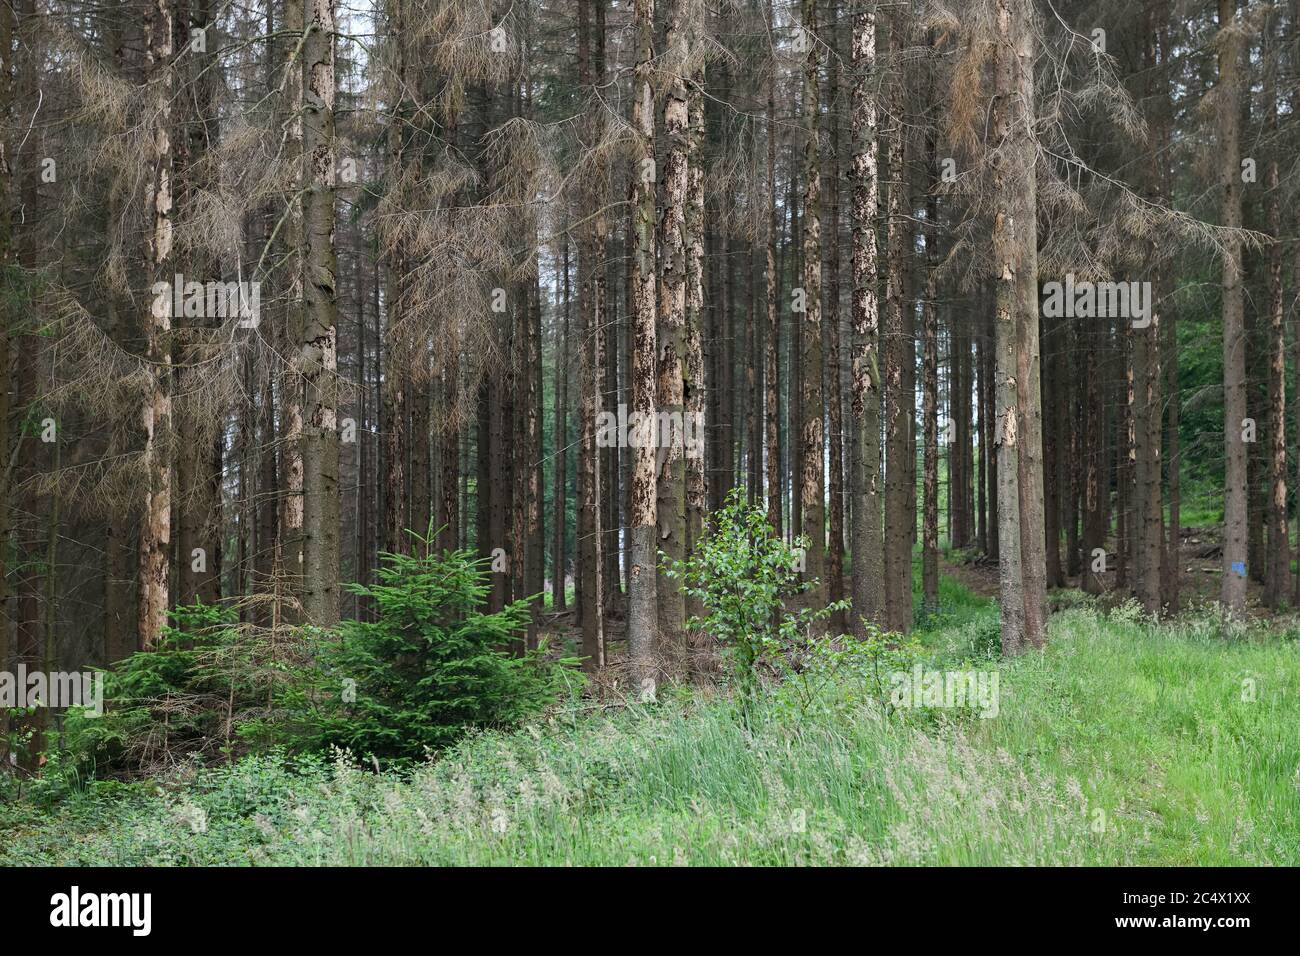 Forest dieback, spruce dieback due to drought and bark beetle attack, dead trees, dead spruce, dead conifers, Sauerland, North Rhine Westphalia; Germa Stock Photo